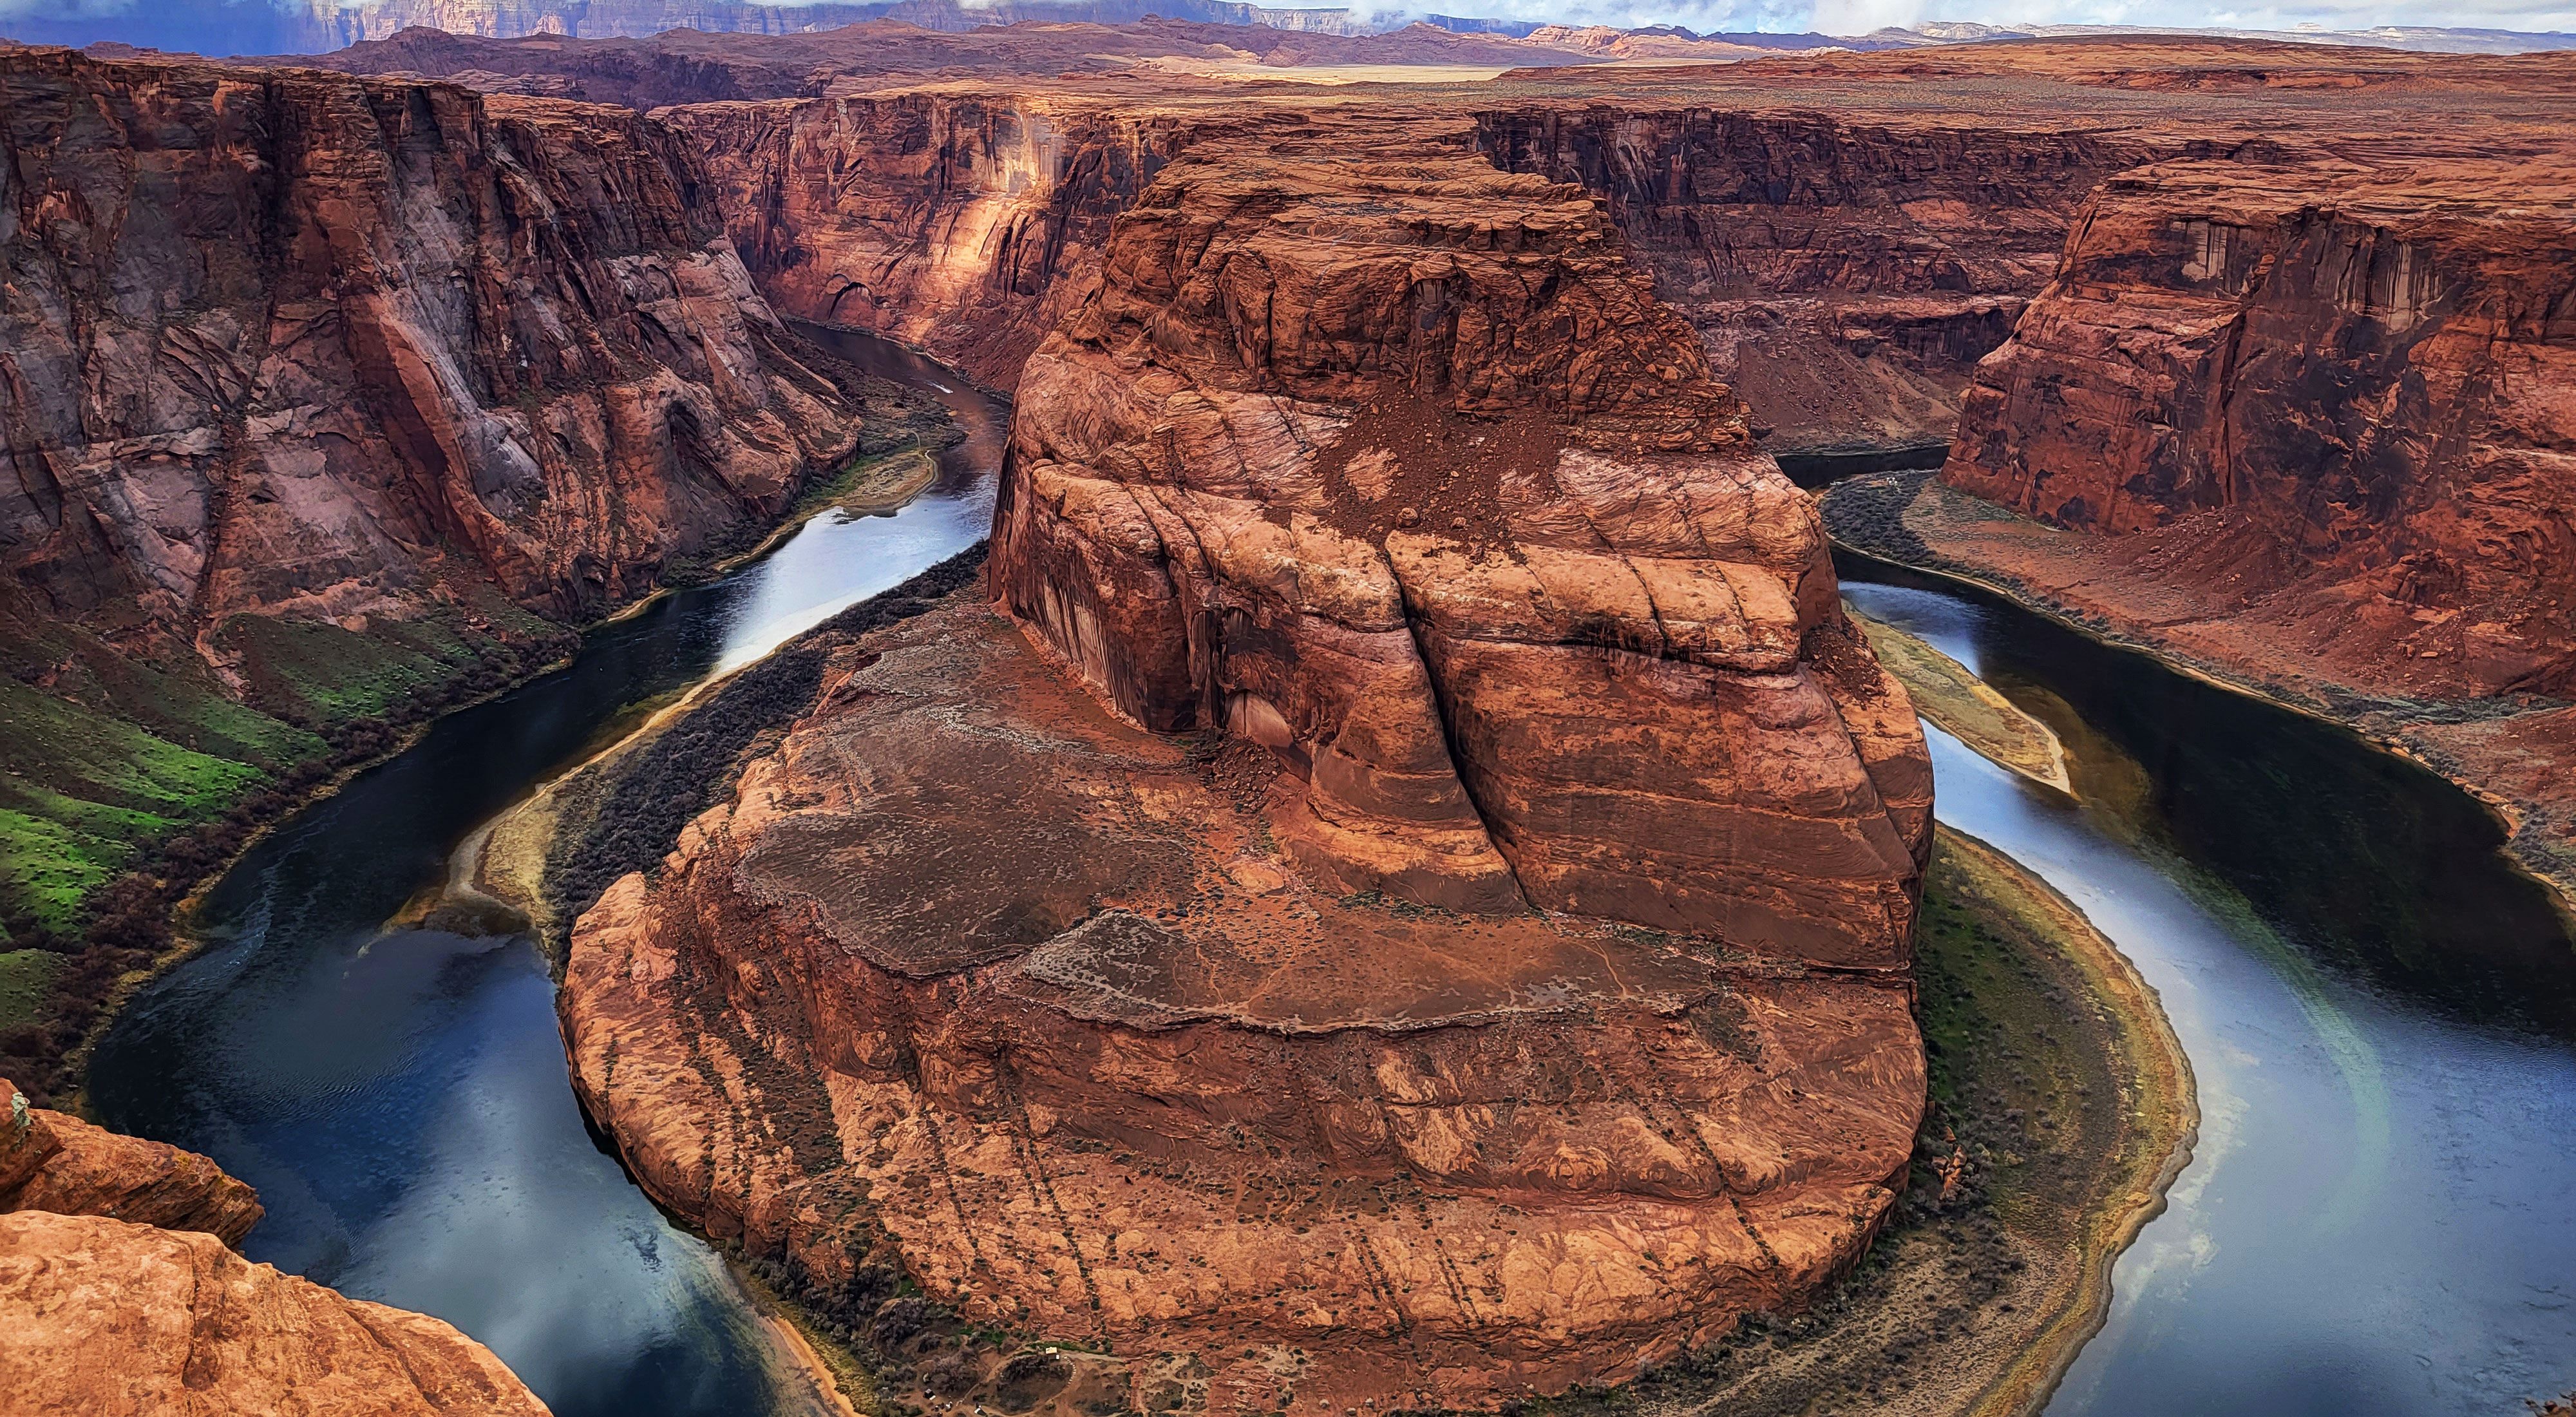 A wide river makes a horseshoe shape, wrapping around a large orange rock in a canyon.